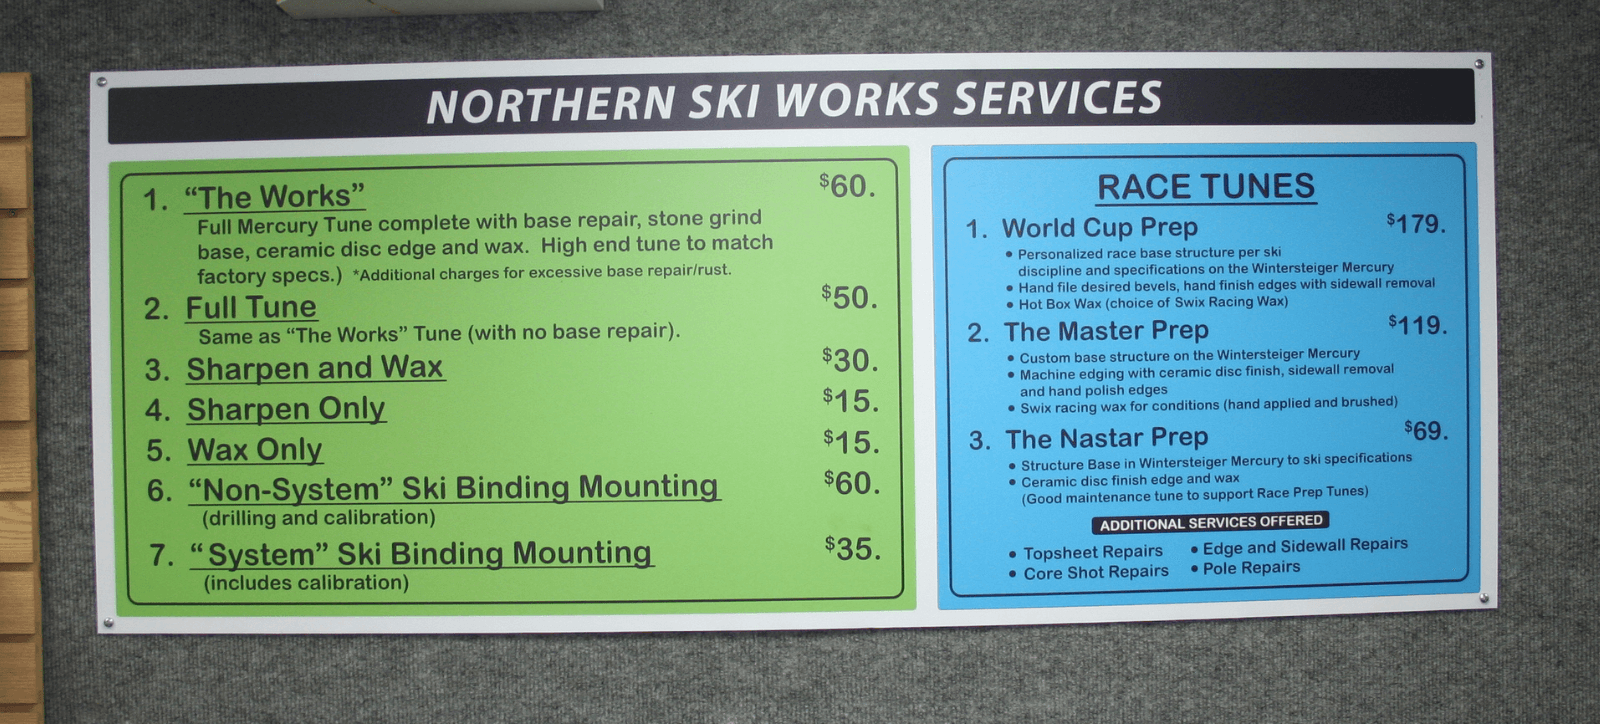 Northern Ski Works Tuning Services